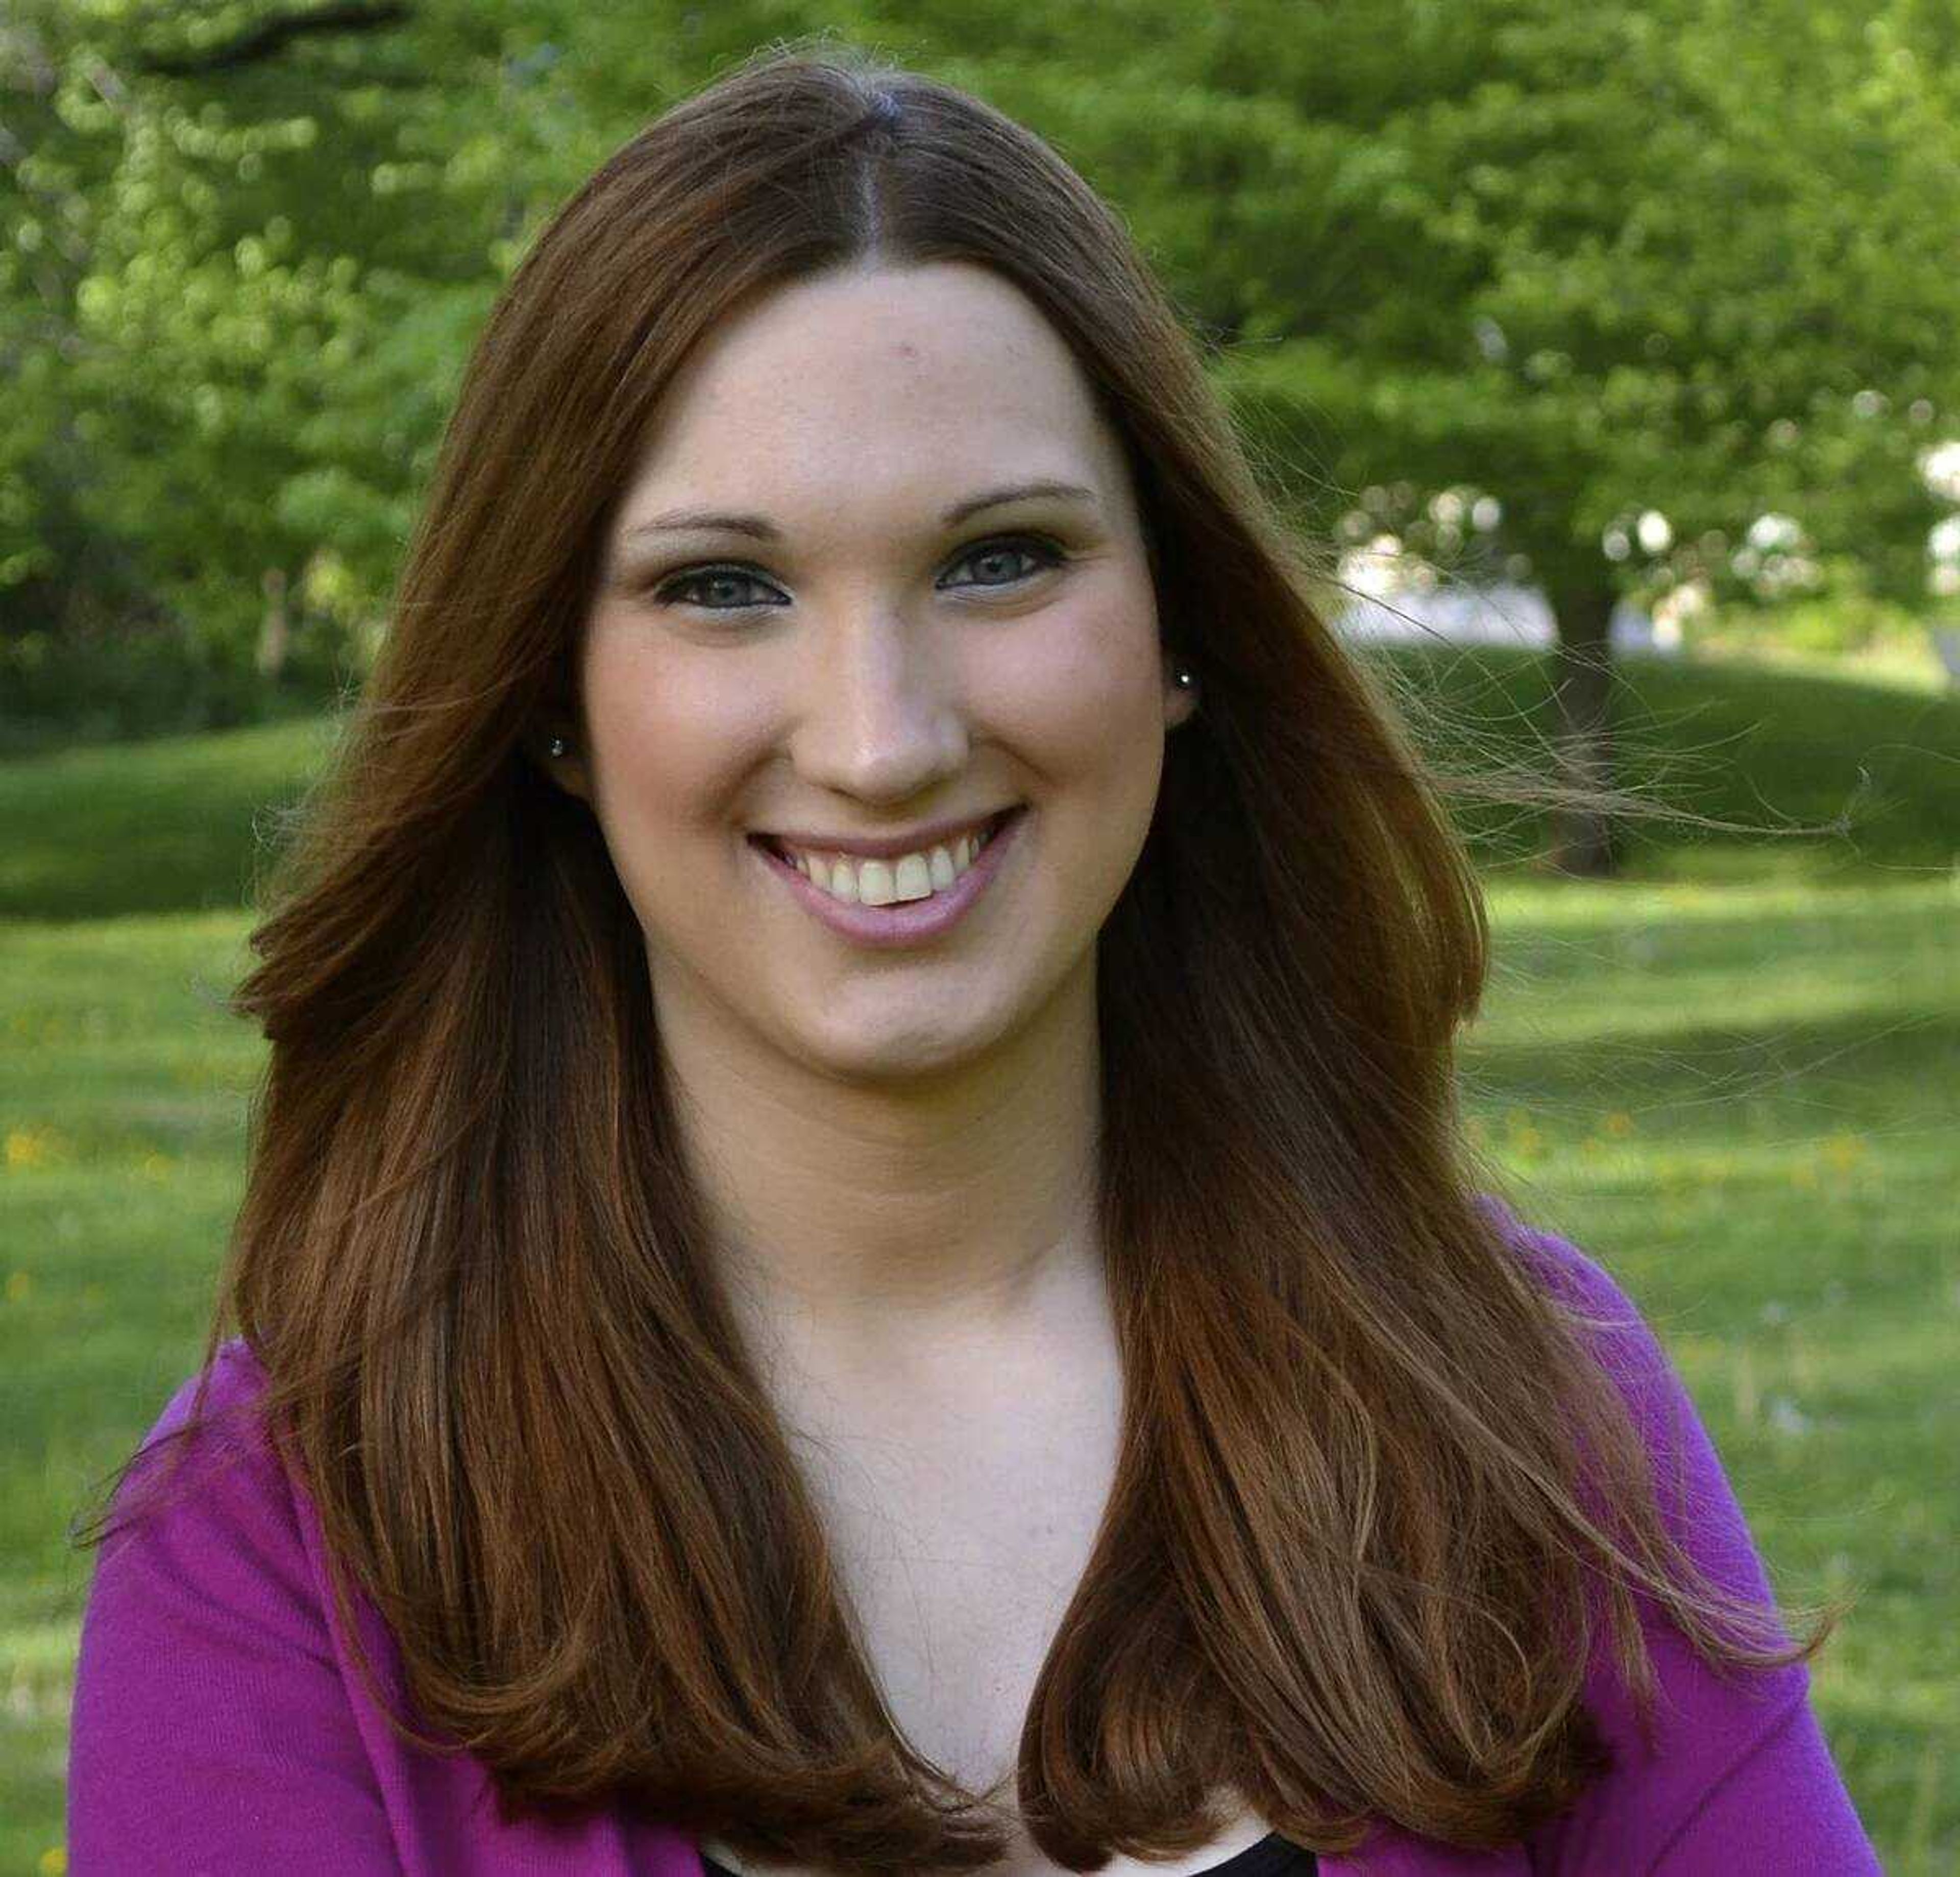 Delaware elects first openly trans person to a state senate seat, inspires hope at Southeast